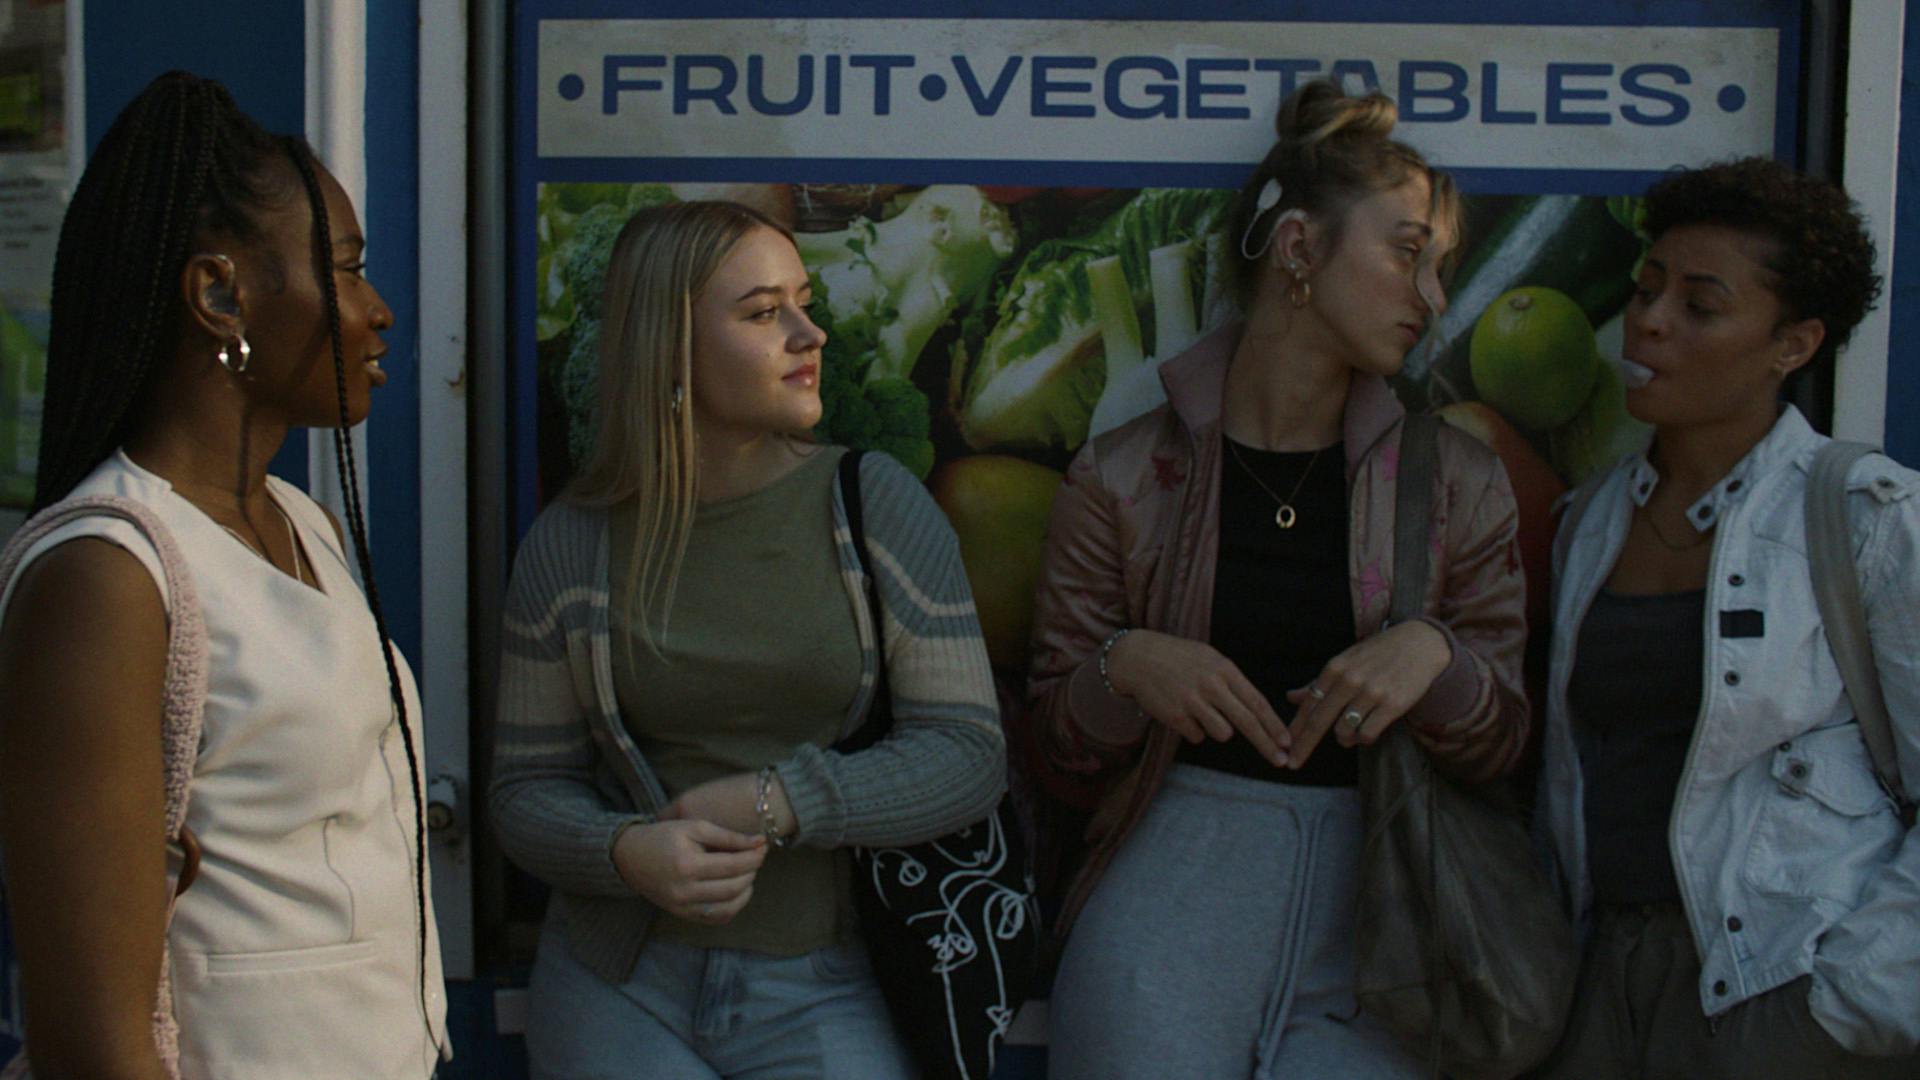 A group of four young people standing outside a fruit and vegetable shop